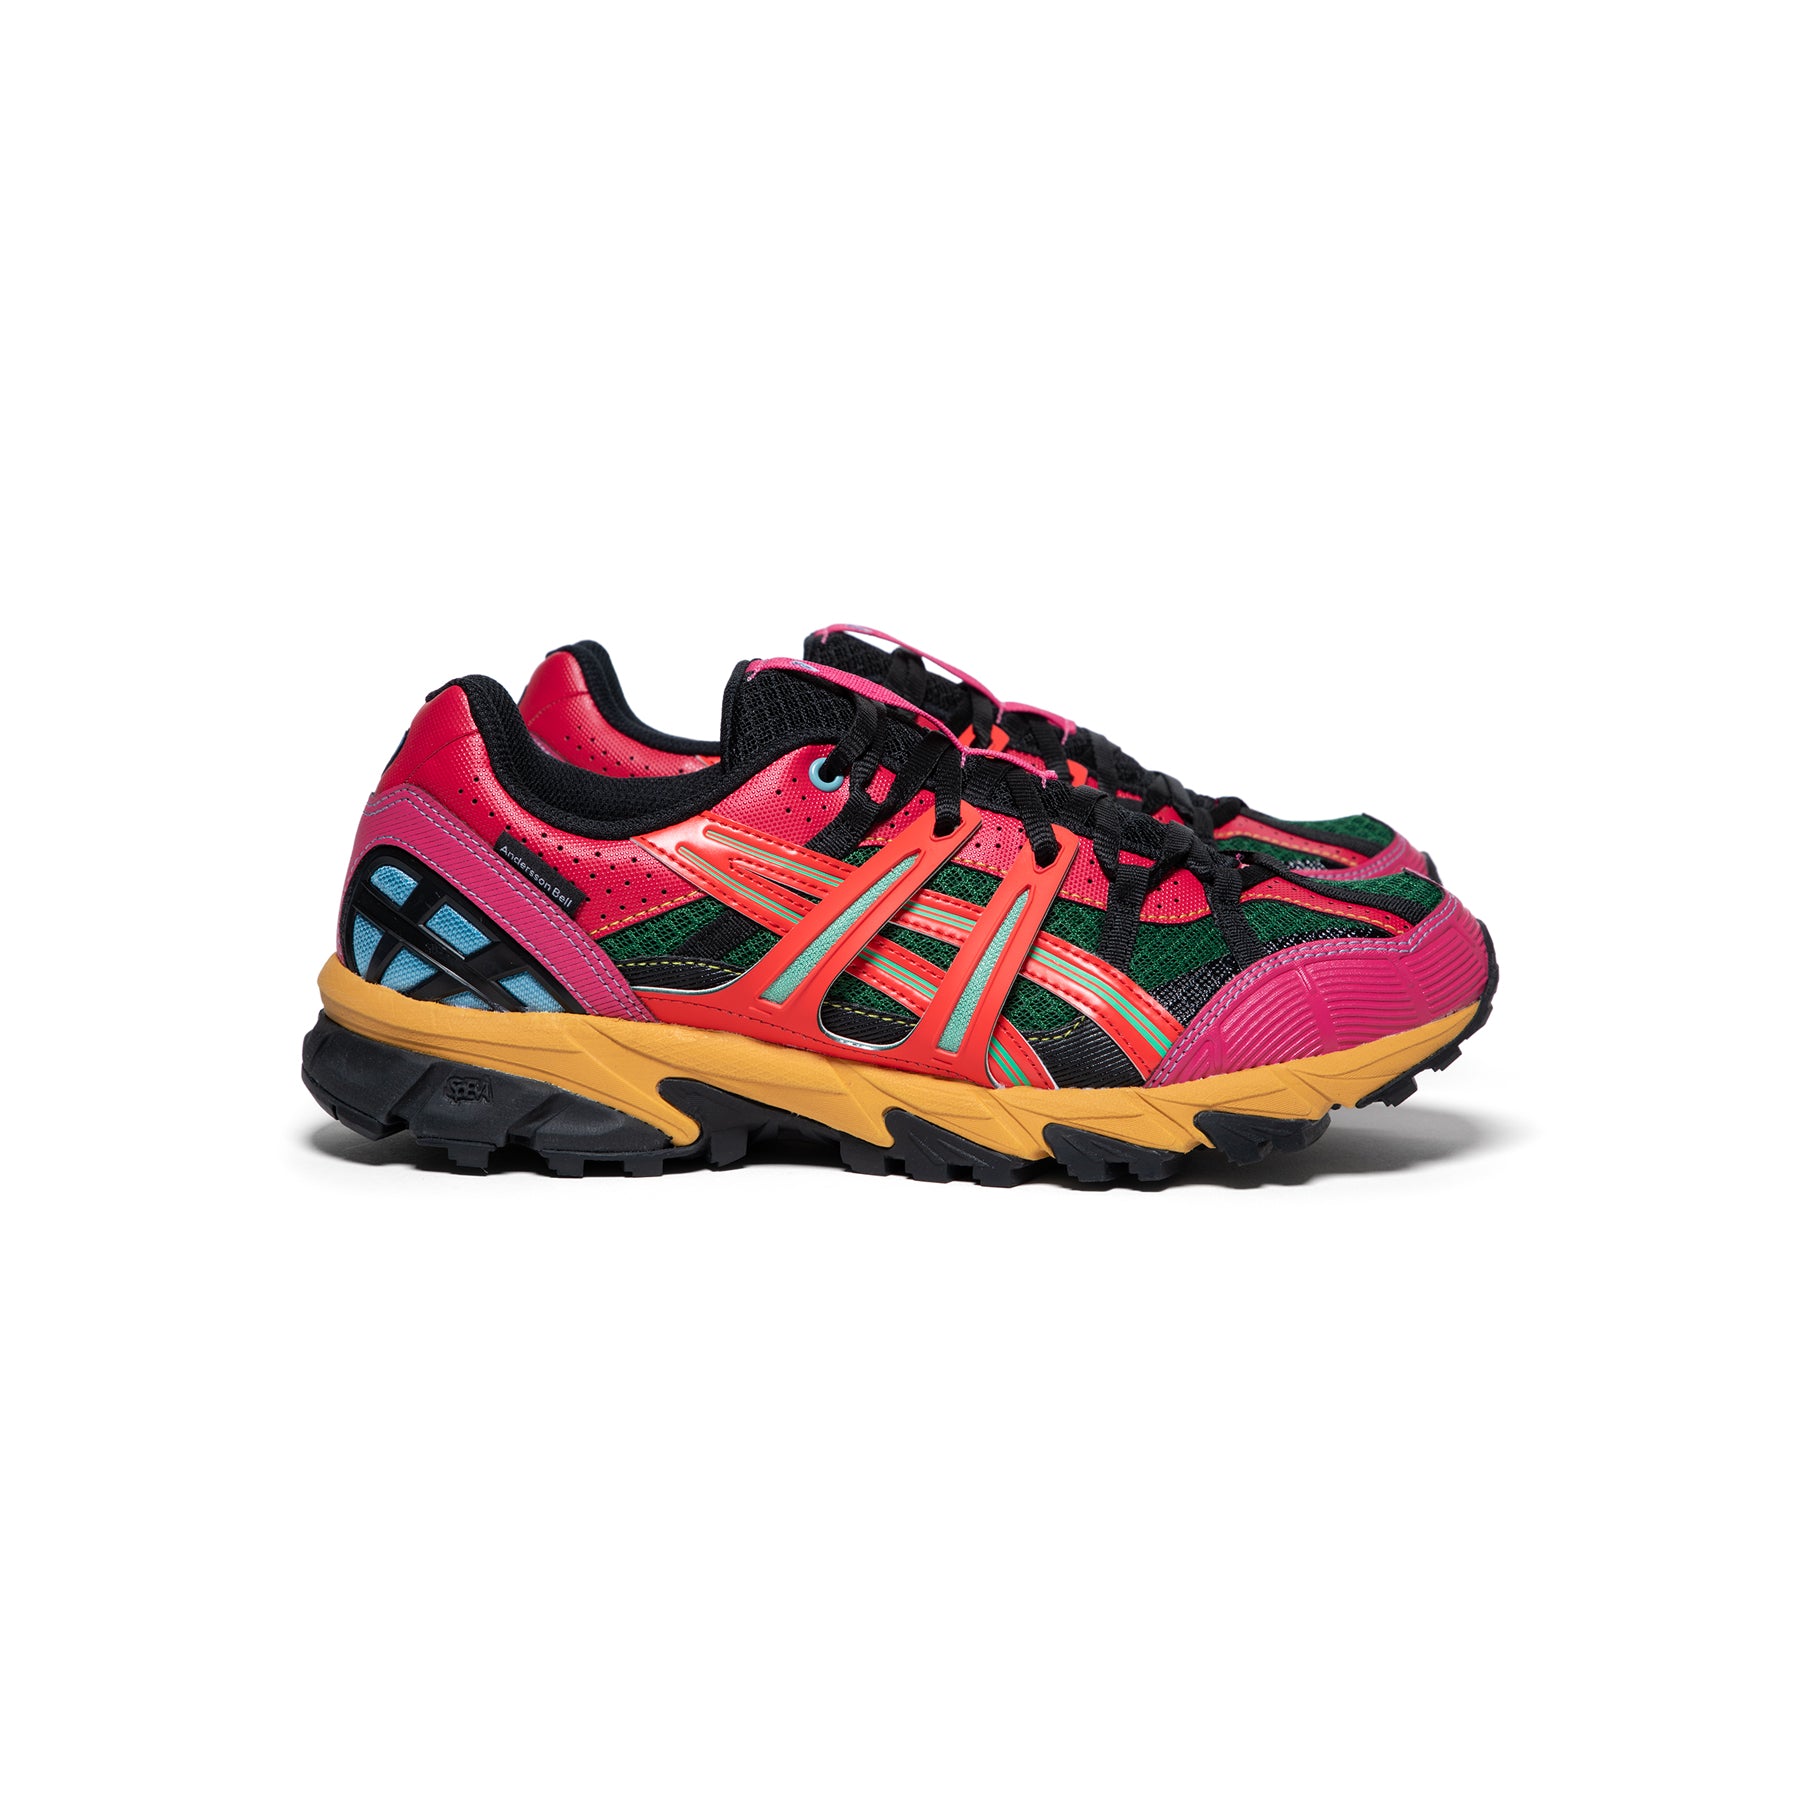 Asics 15-50 (Bright Rose/Evergreen) – Concepts